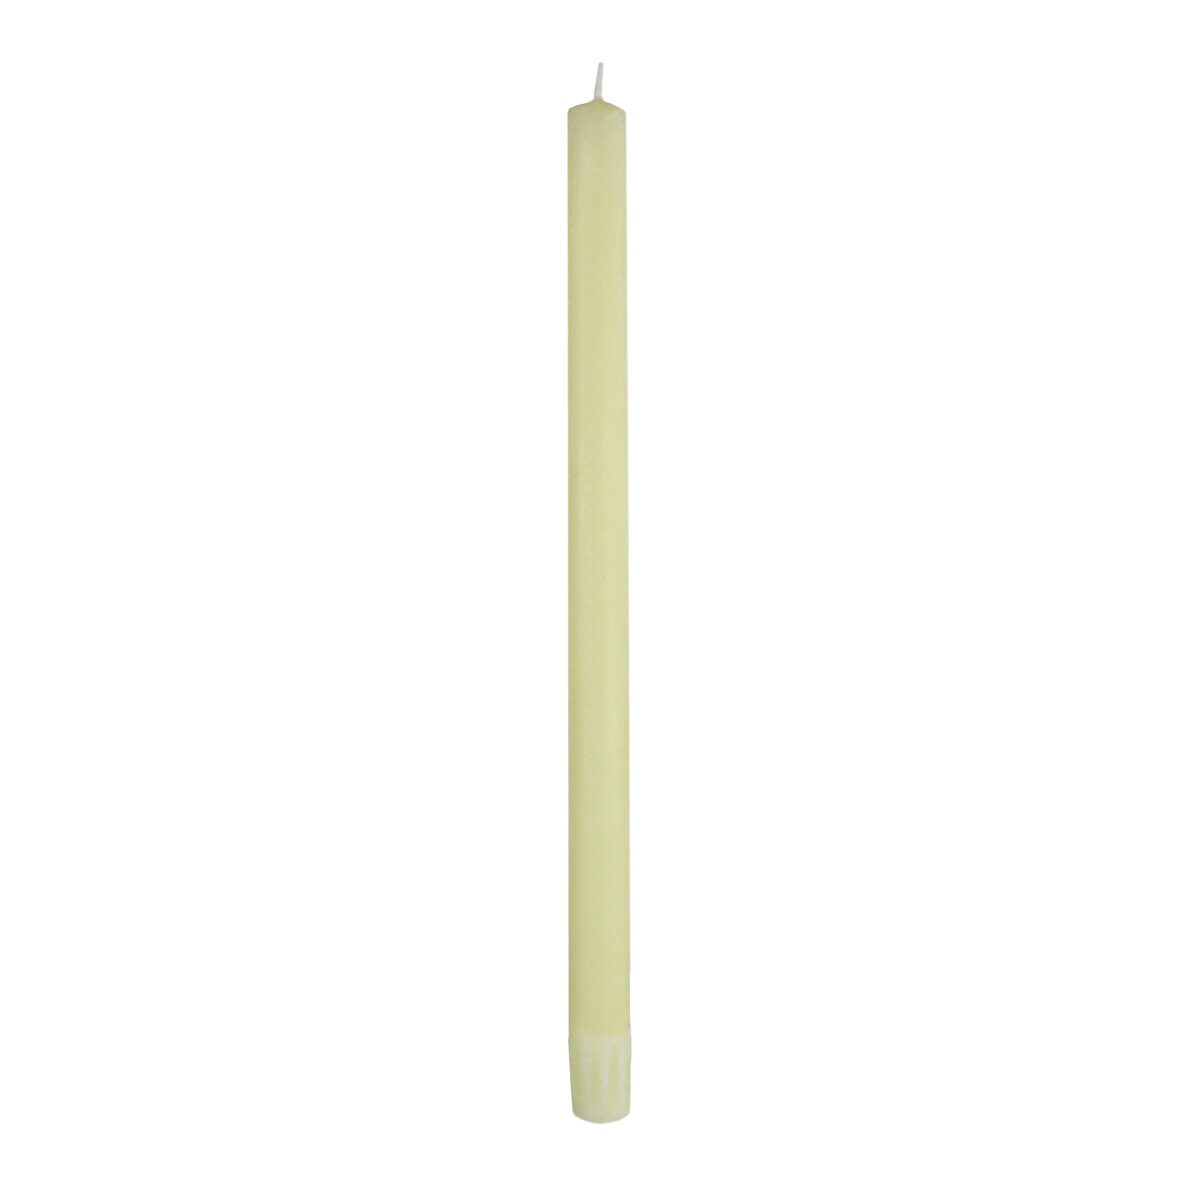 100% BEESWAX 7/8" x 13" SELF FITTING END CANDLE STICK (Box of 24)